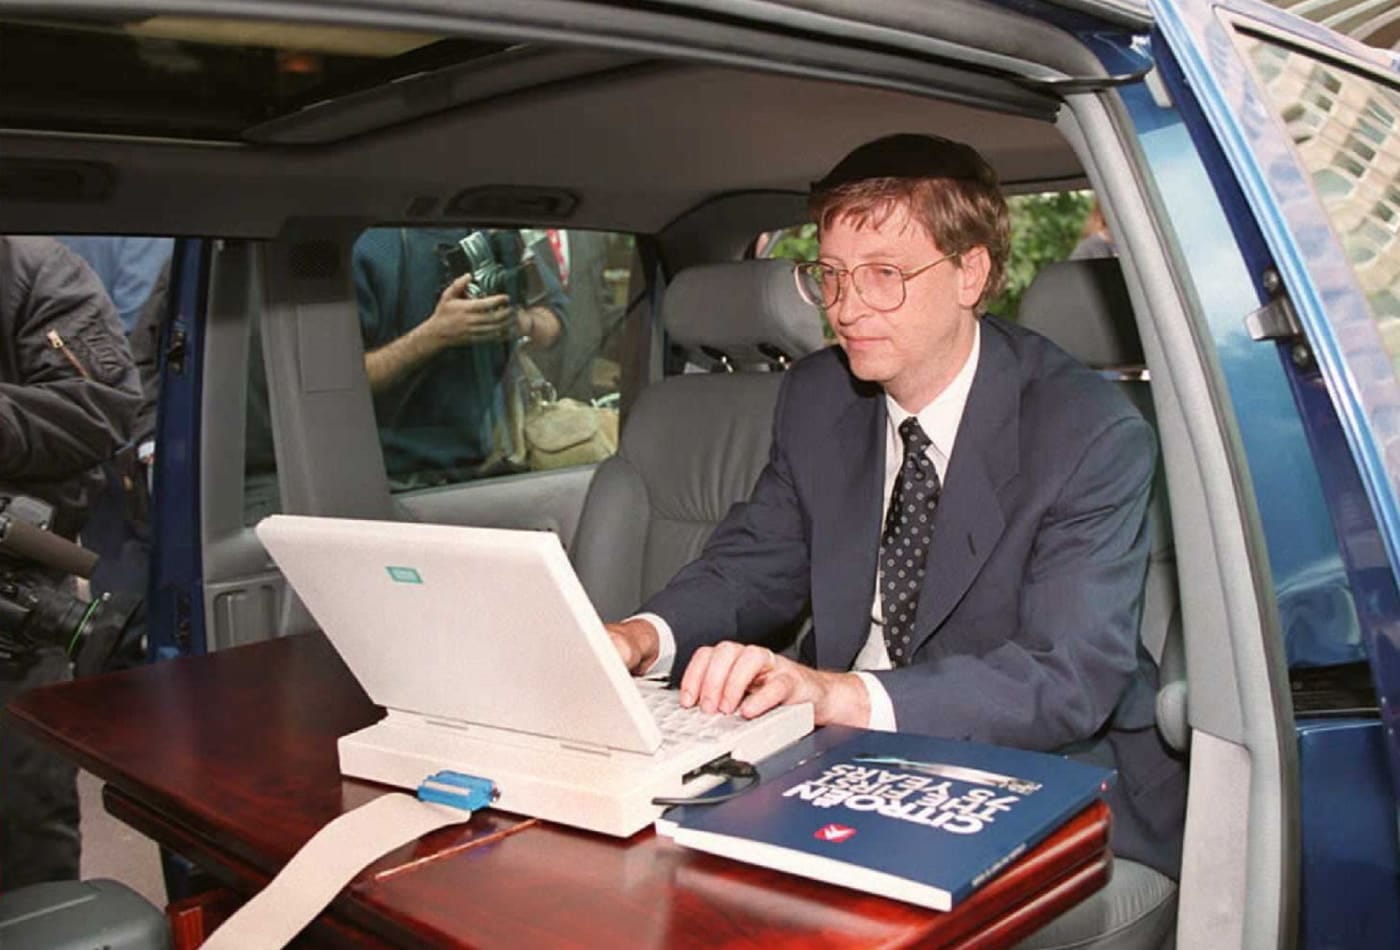 How Bill Gates described the internet to David Letterman in 1995